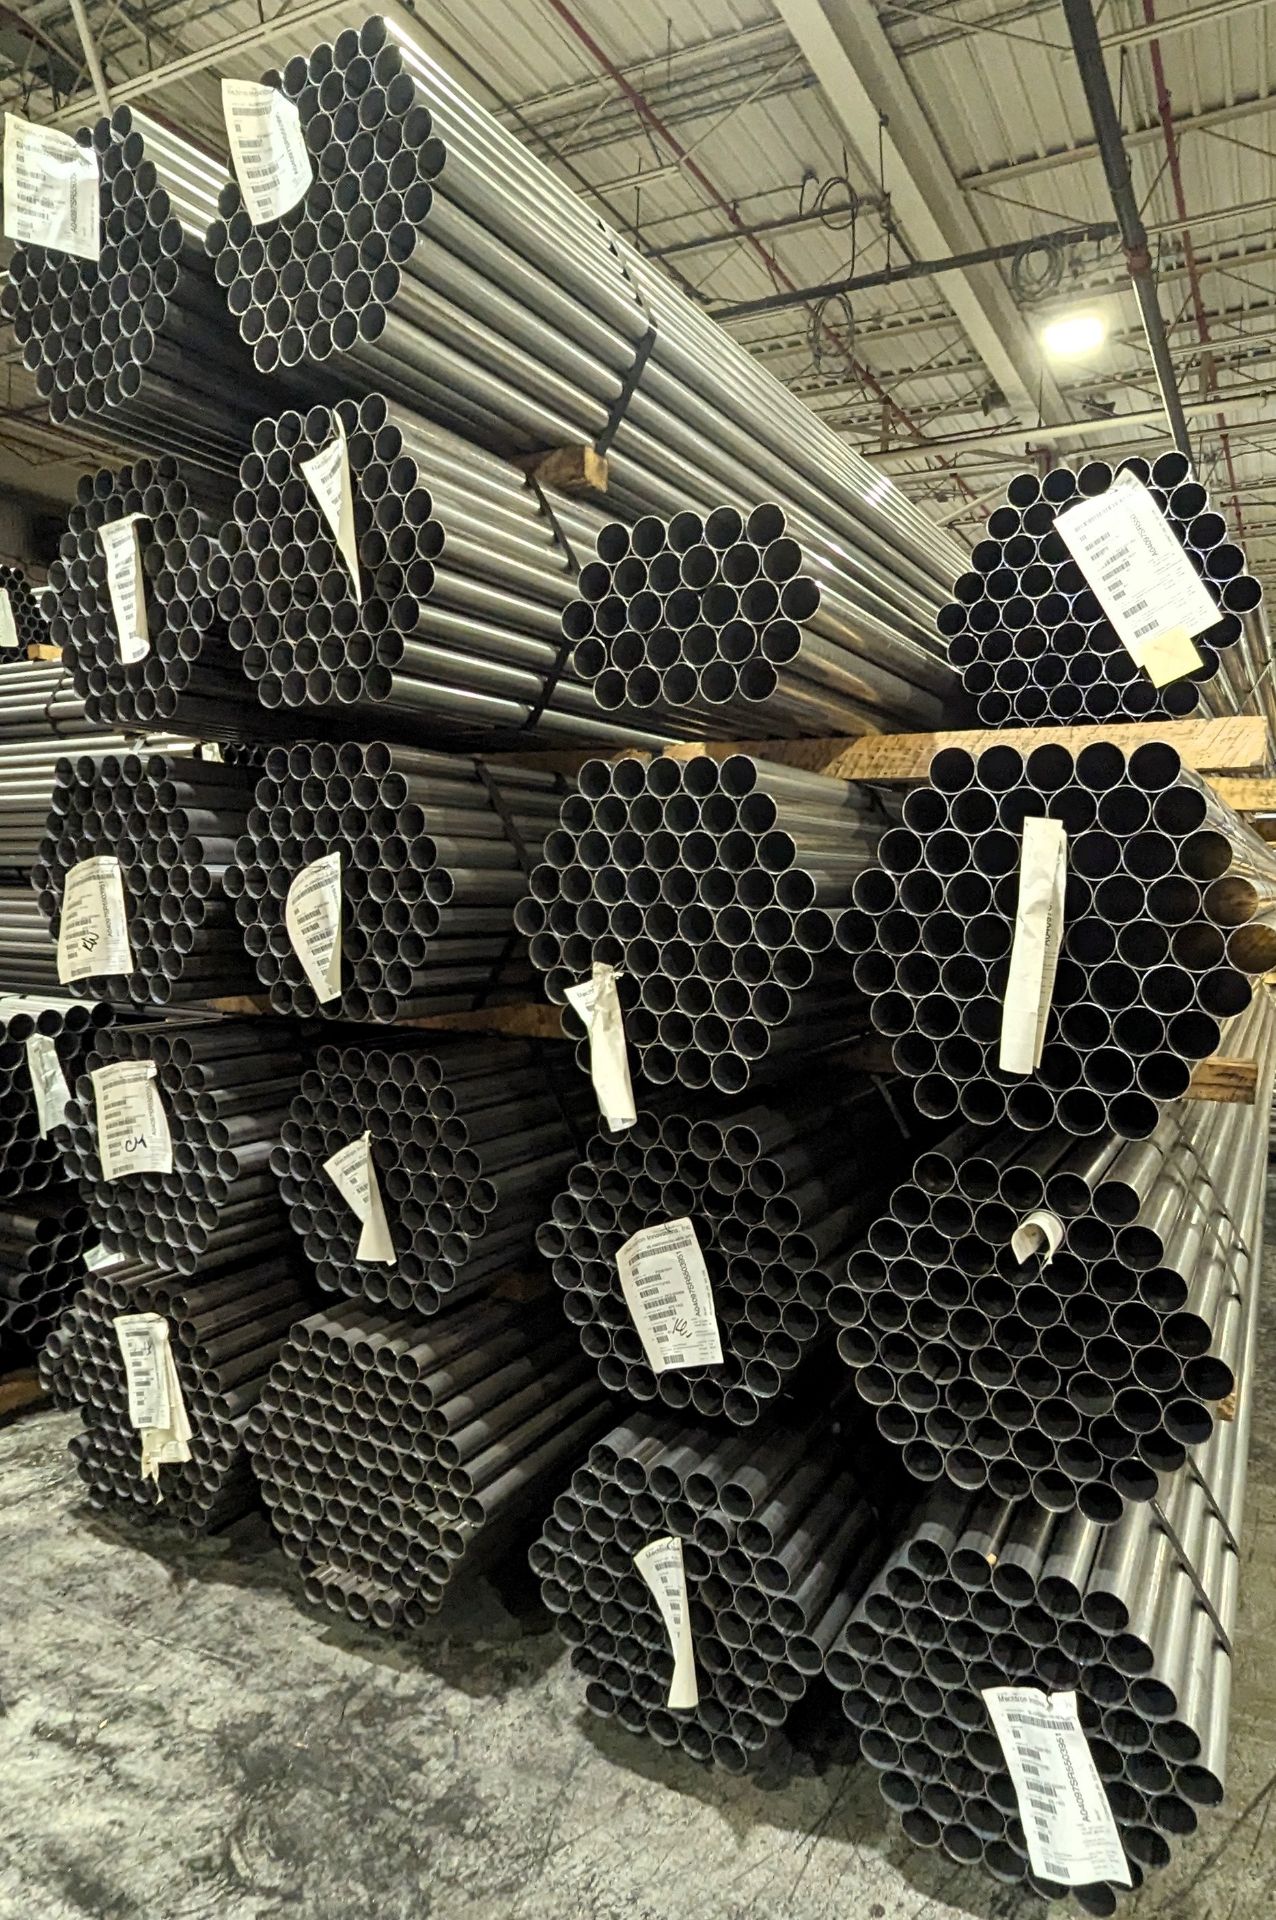 PARTIAL VIEW OF 215+ TONS OF STAINLESS STEEL TUBE INVENTORY